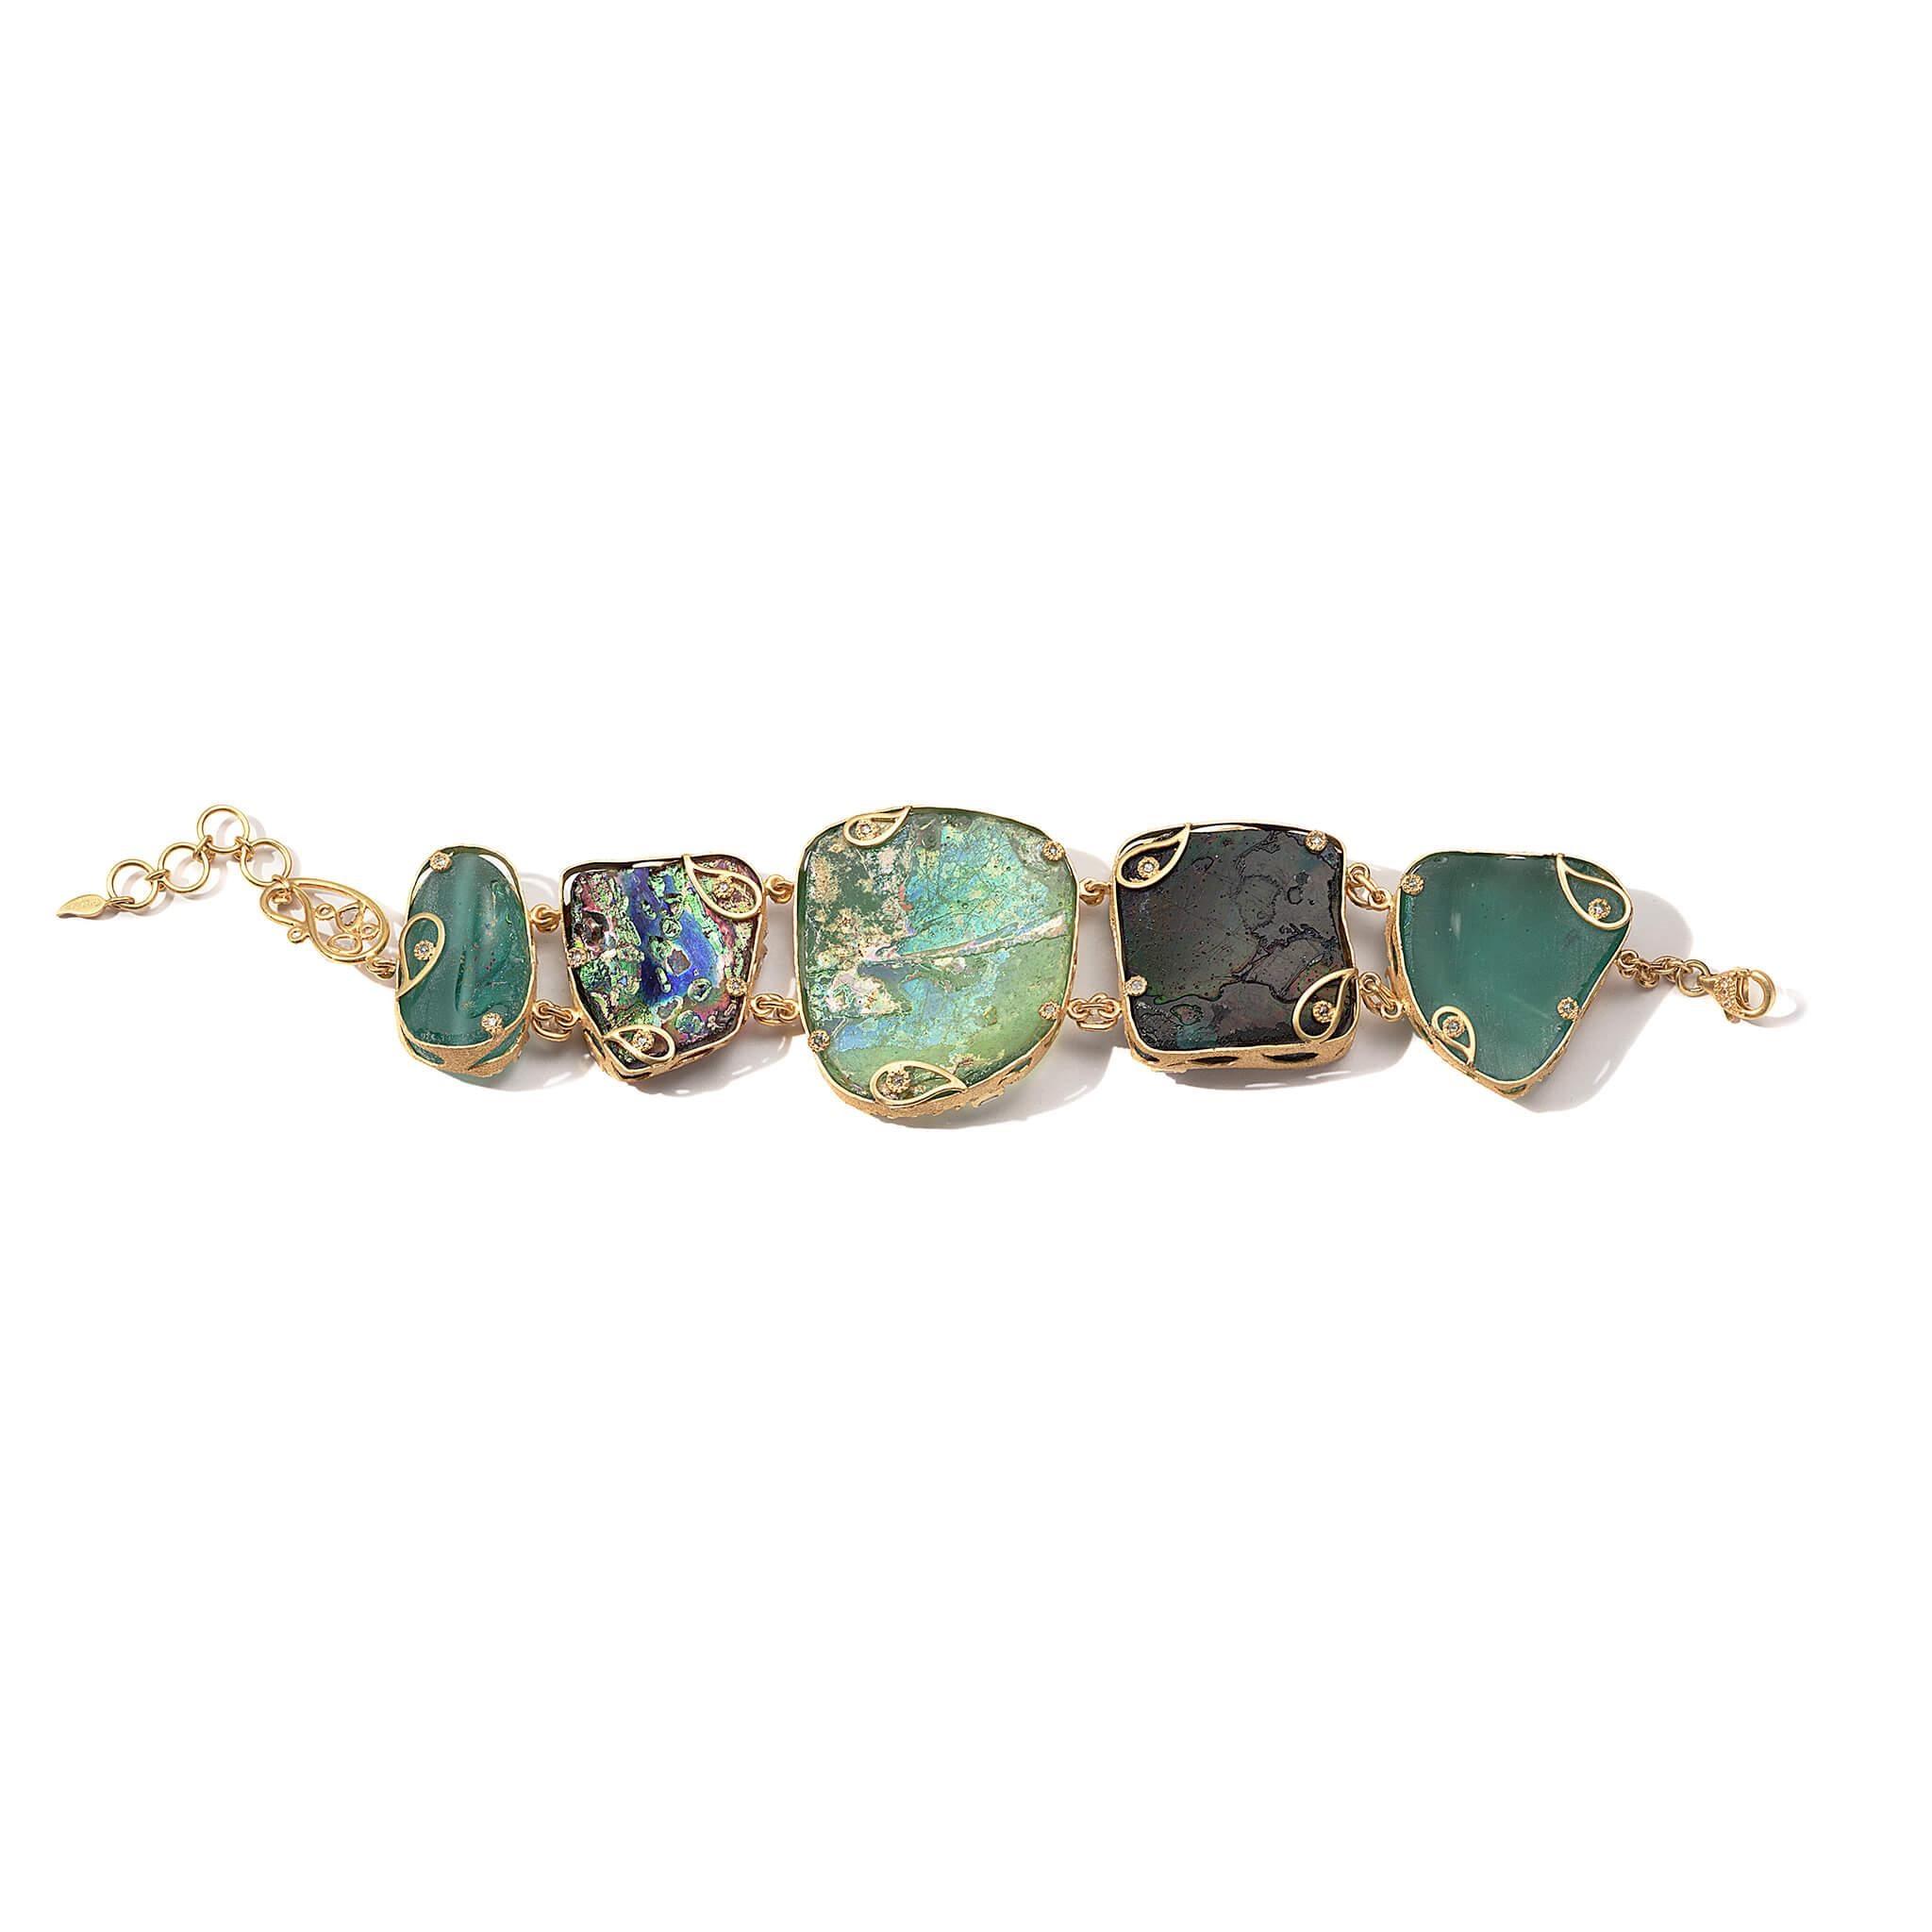 Coomi ancient Roman glass bracelet set in 20K yellow gold with 2.06cts diamonds.

Coomi presents her latest addition to the Antiquity collection, Ancient Roman Glass. Each slice of the world’s first handblown glass, dating back to the 1st century